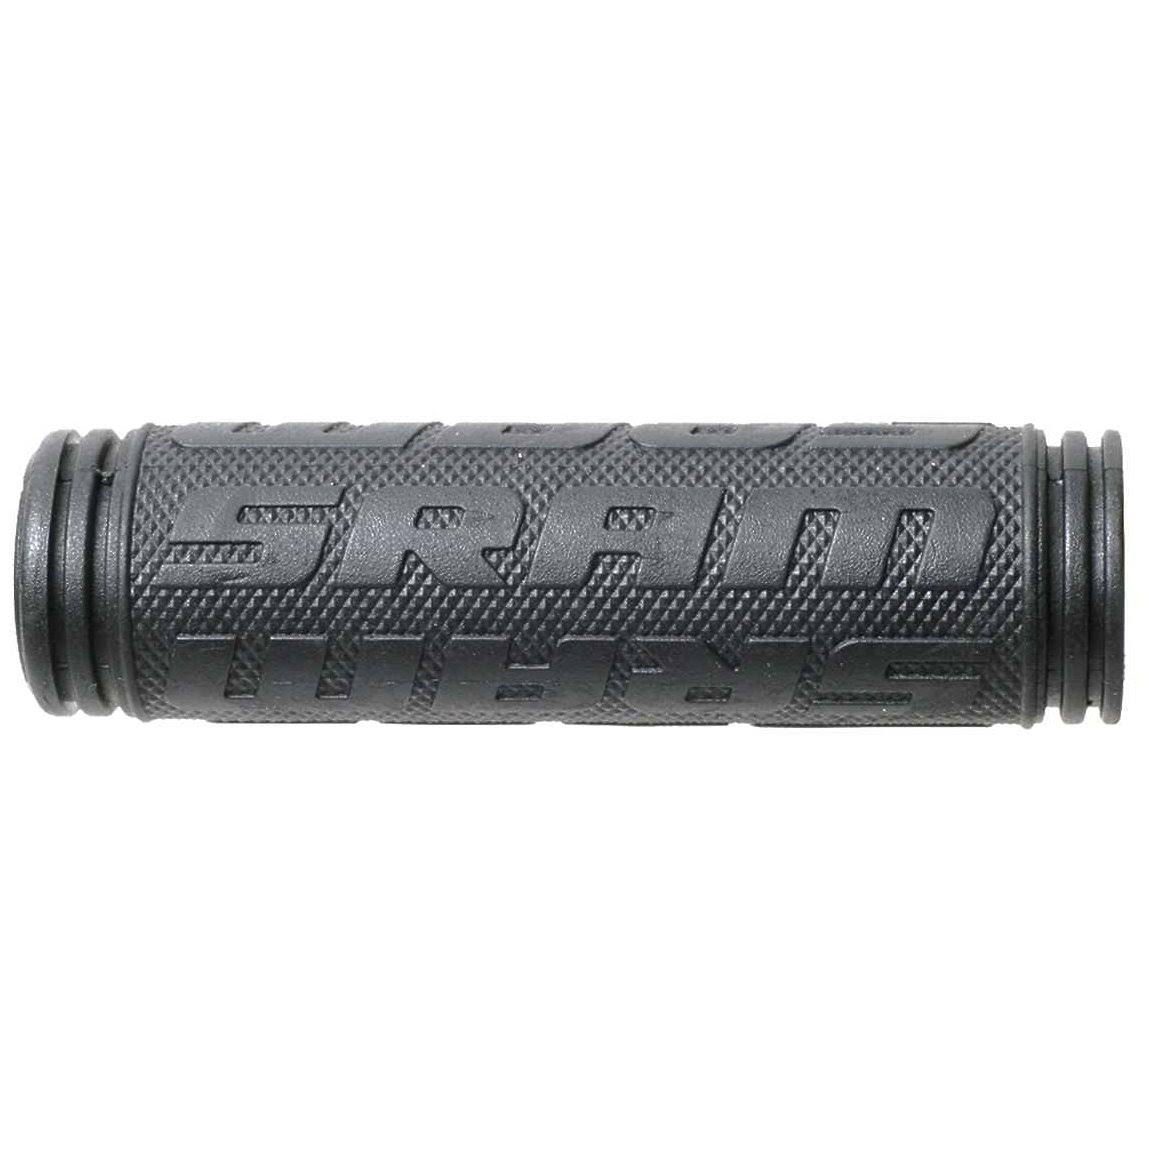 Sram Stationary Bicycle Grips - Black, 110mm, 1 Pair